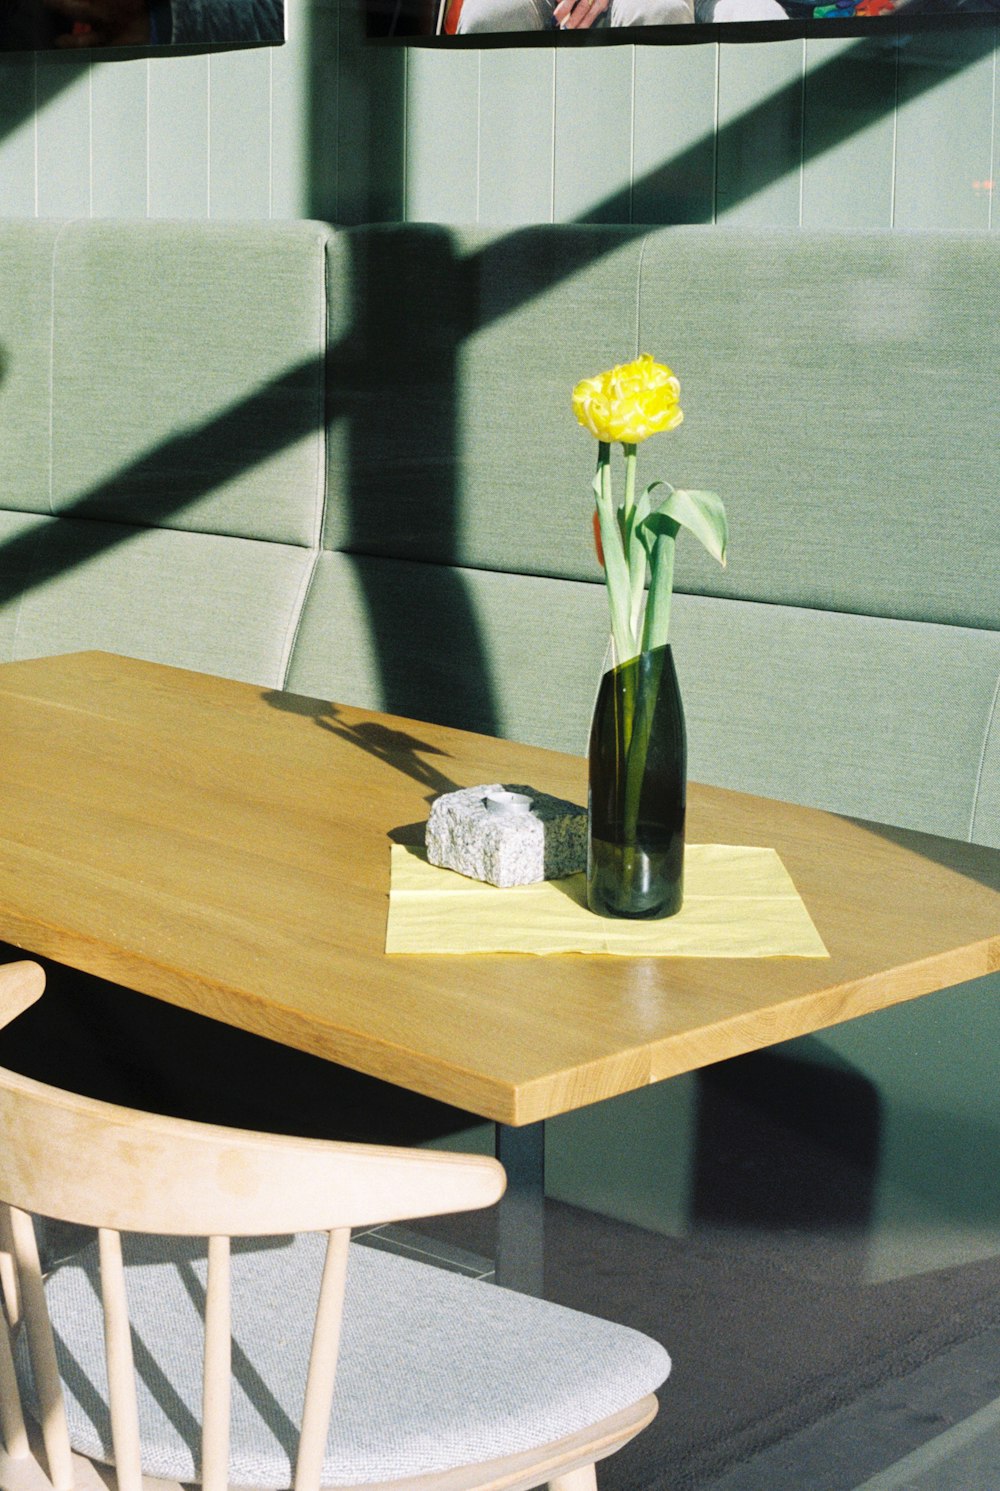 a wooden table with a vase of flowers on it